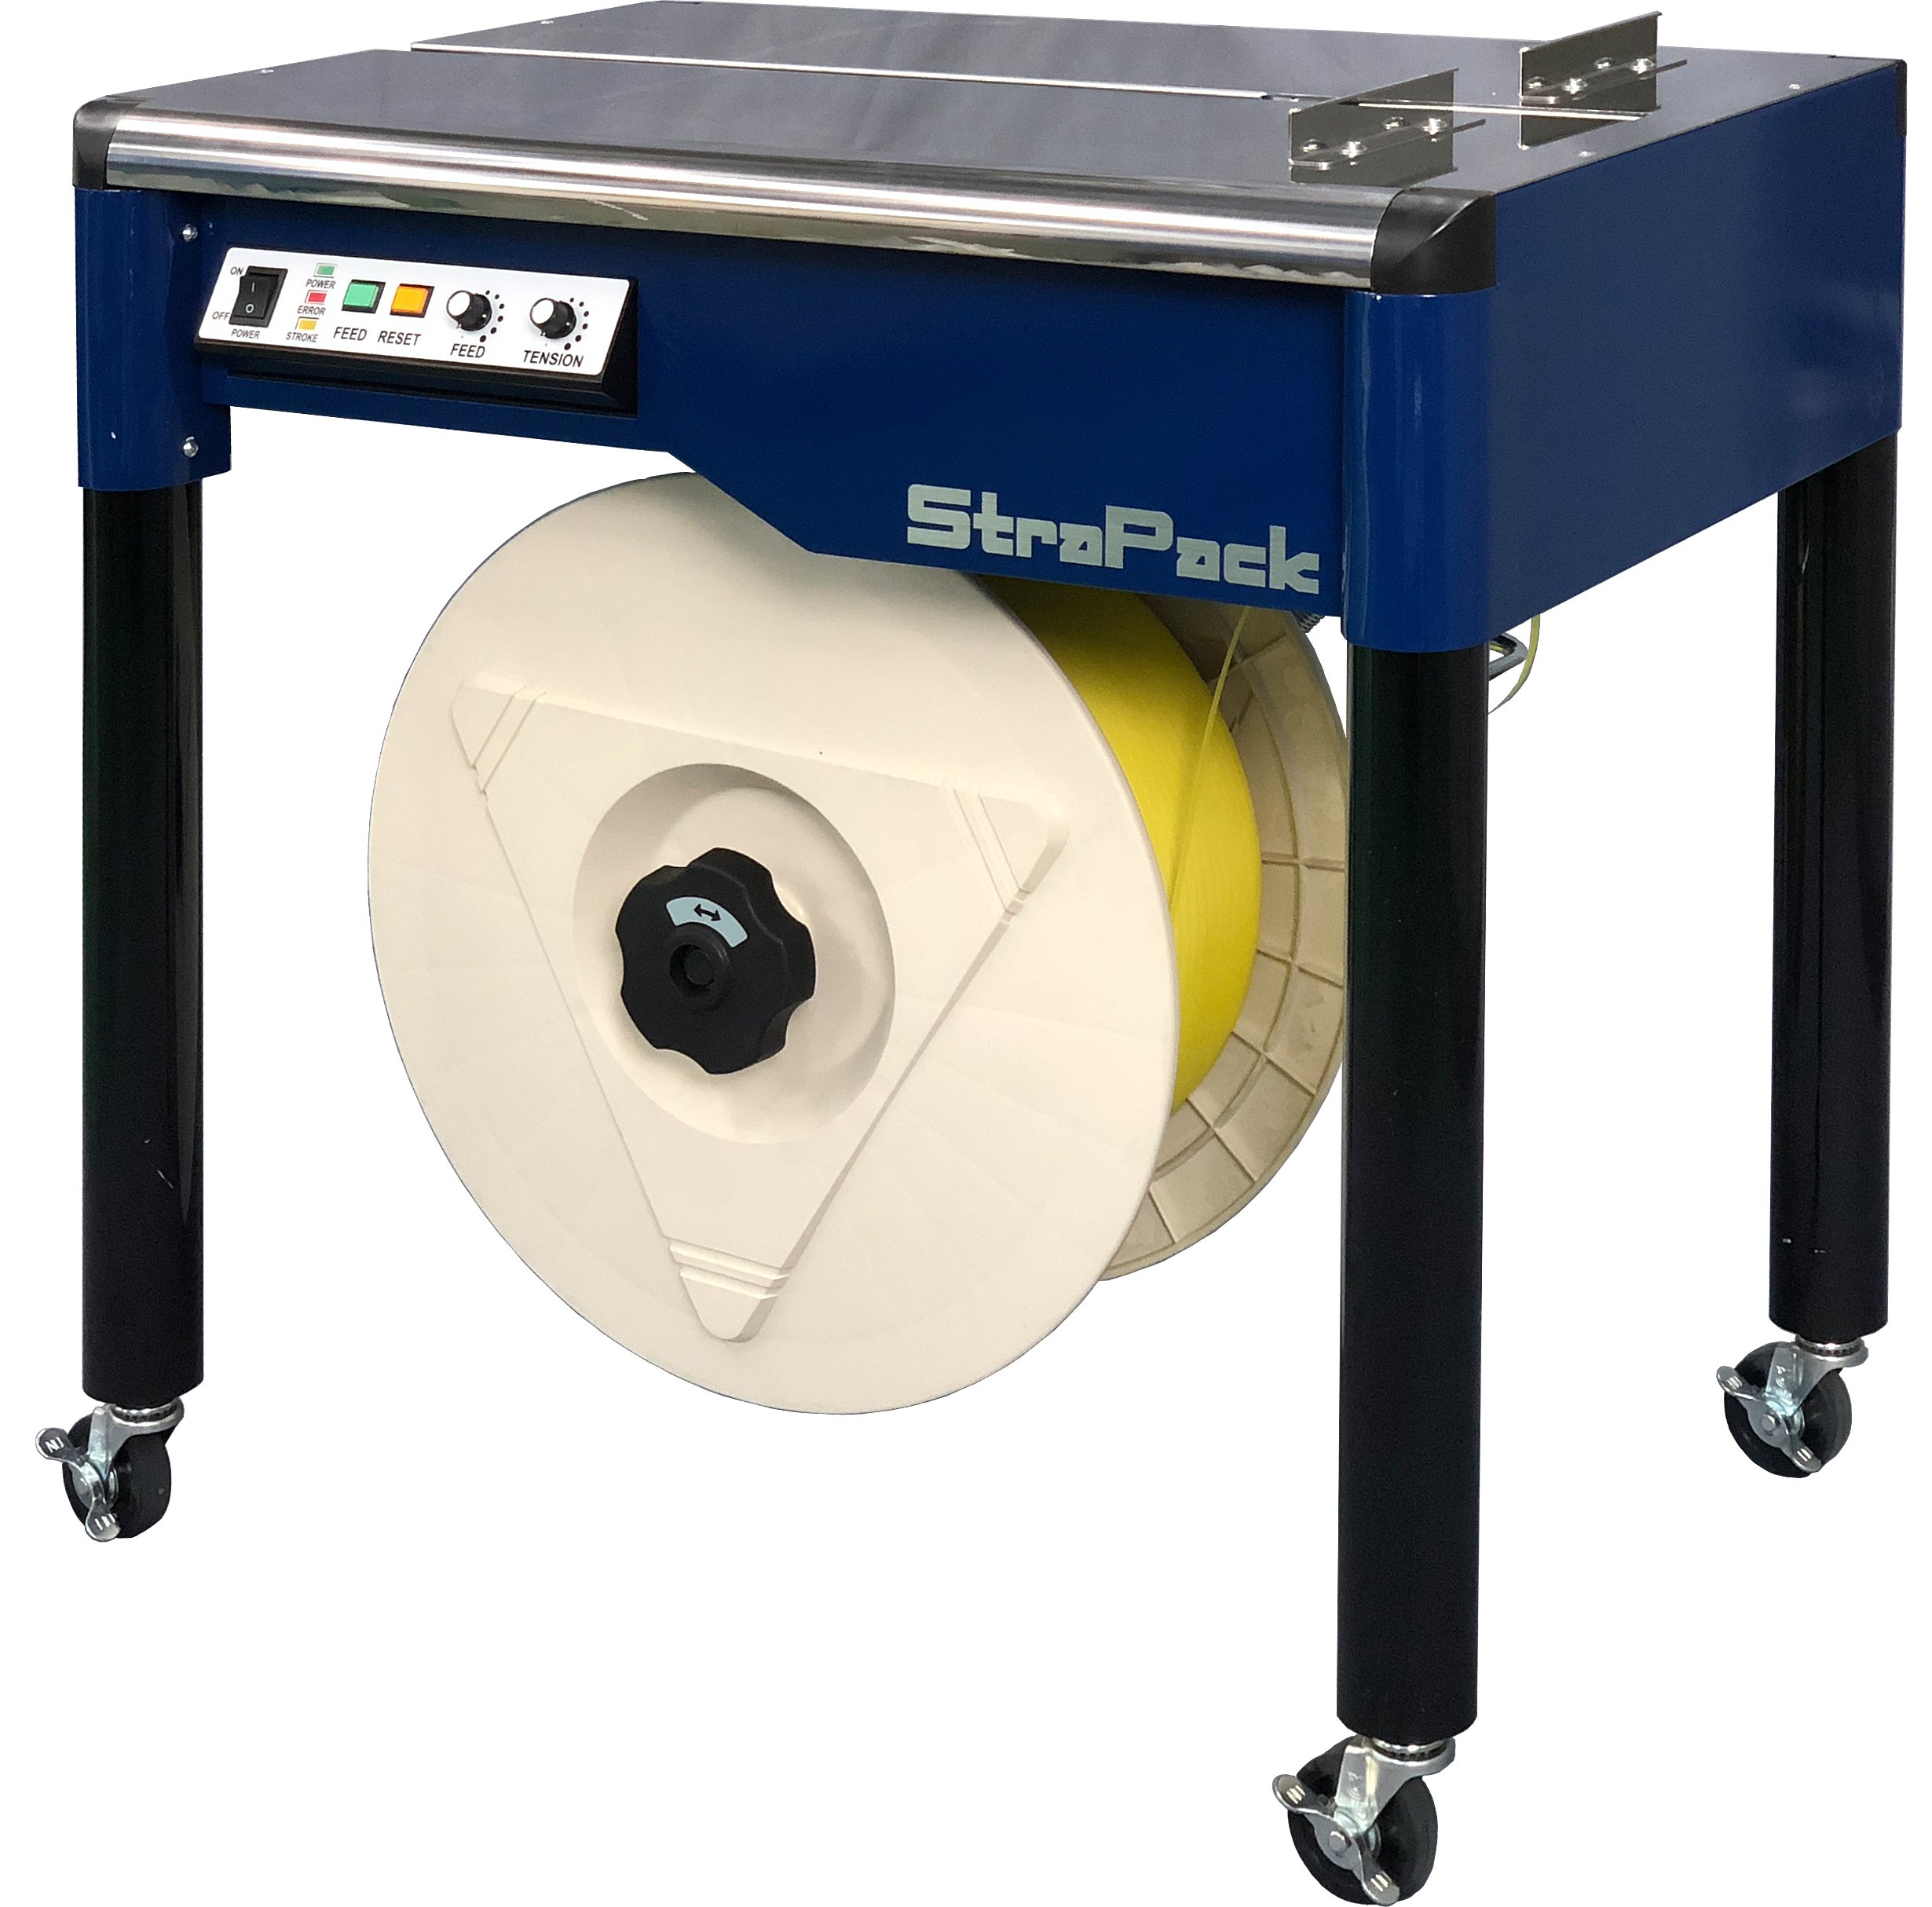 iQ400 - Tabletop Strapping Machine